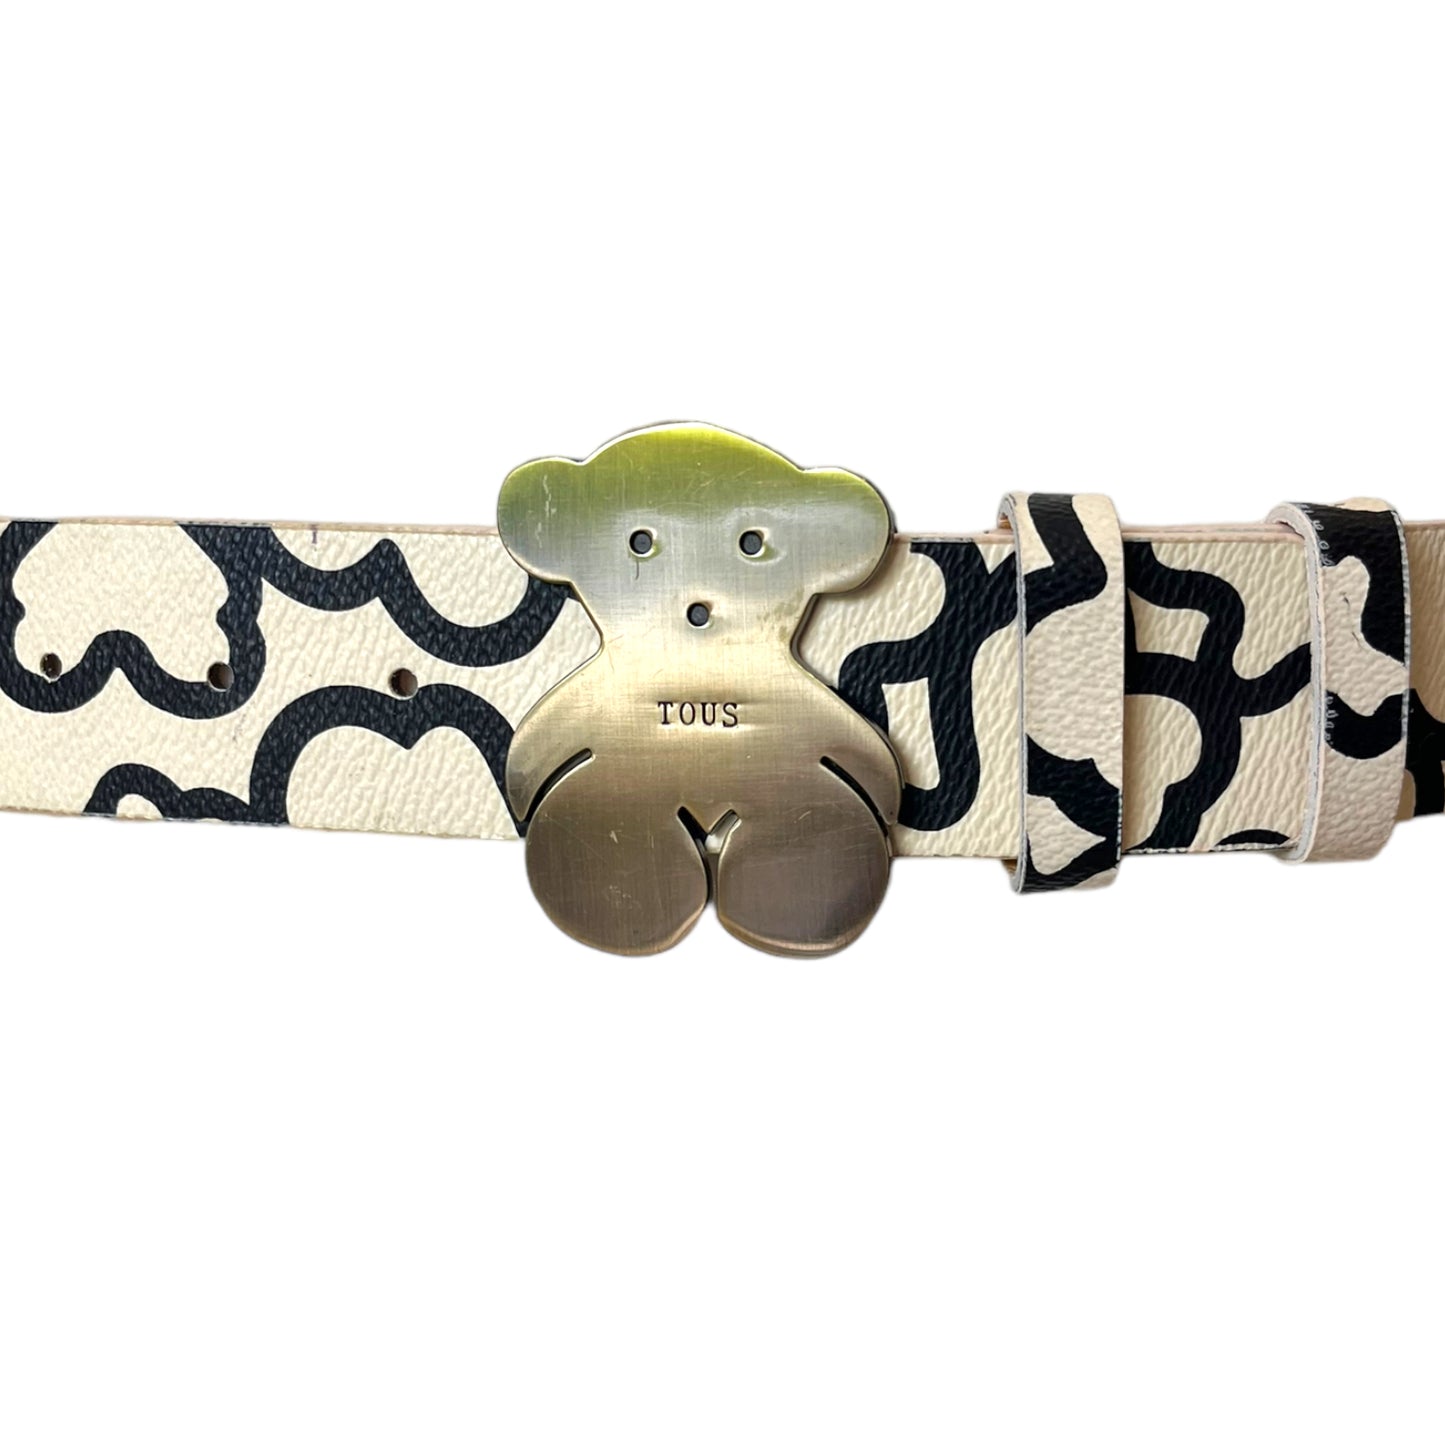 Tous Cream and Black Leather Belt